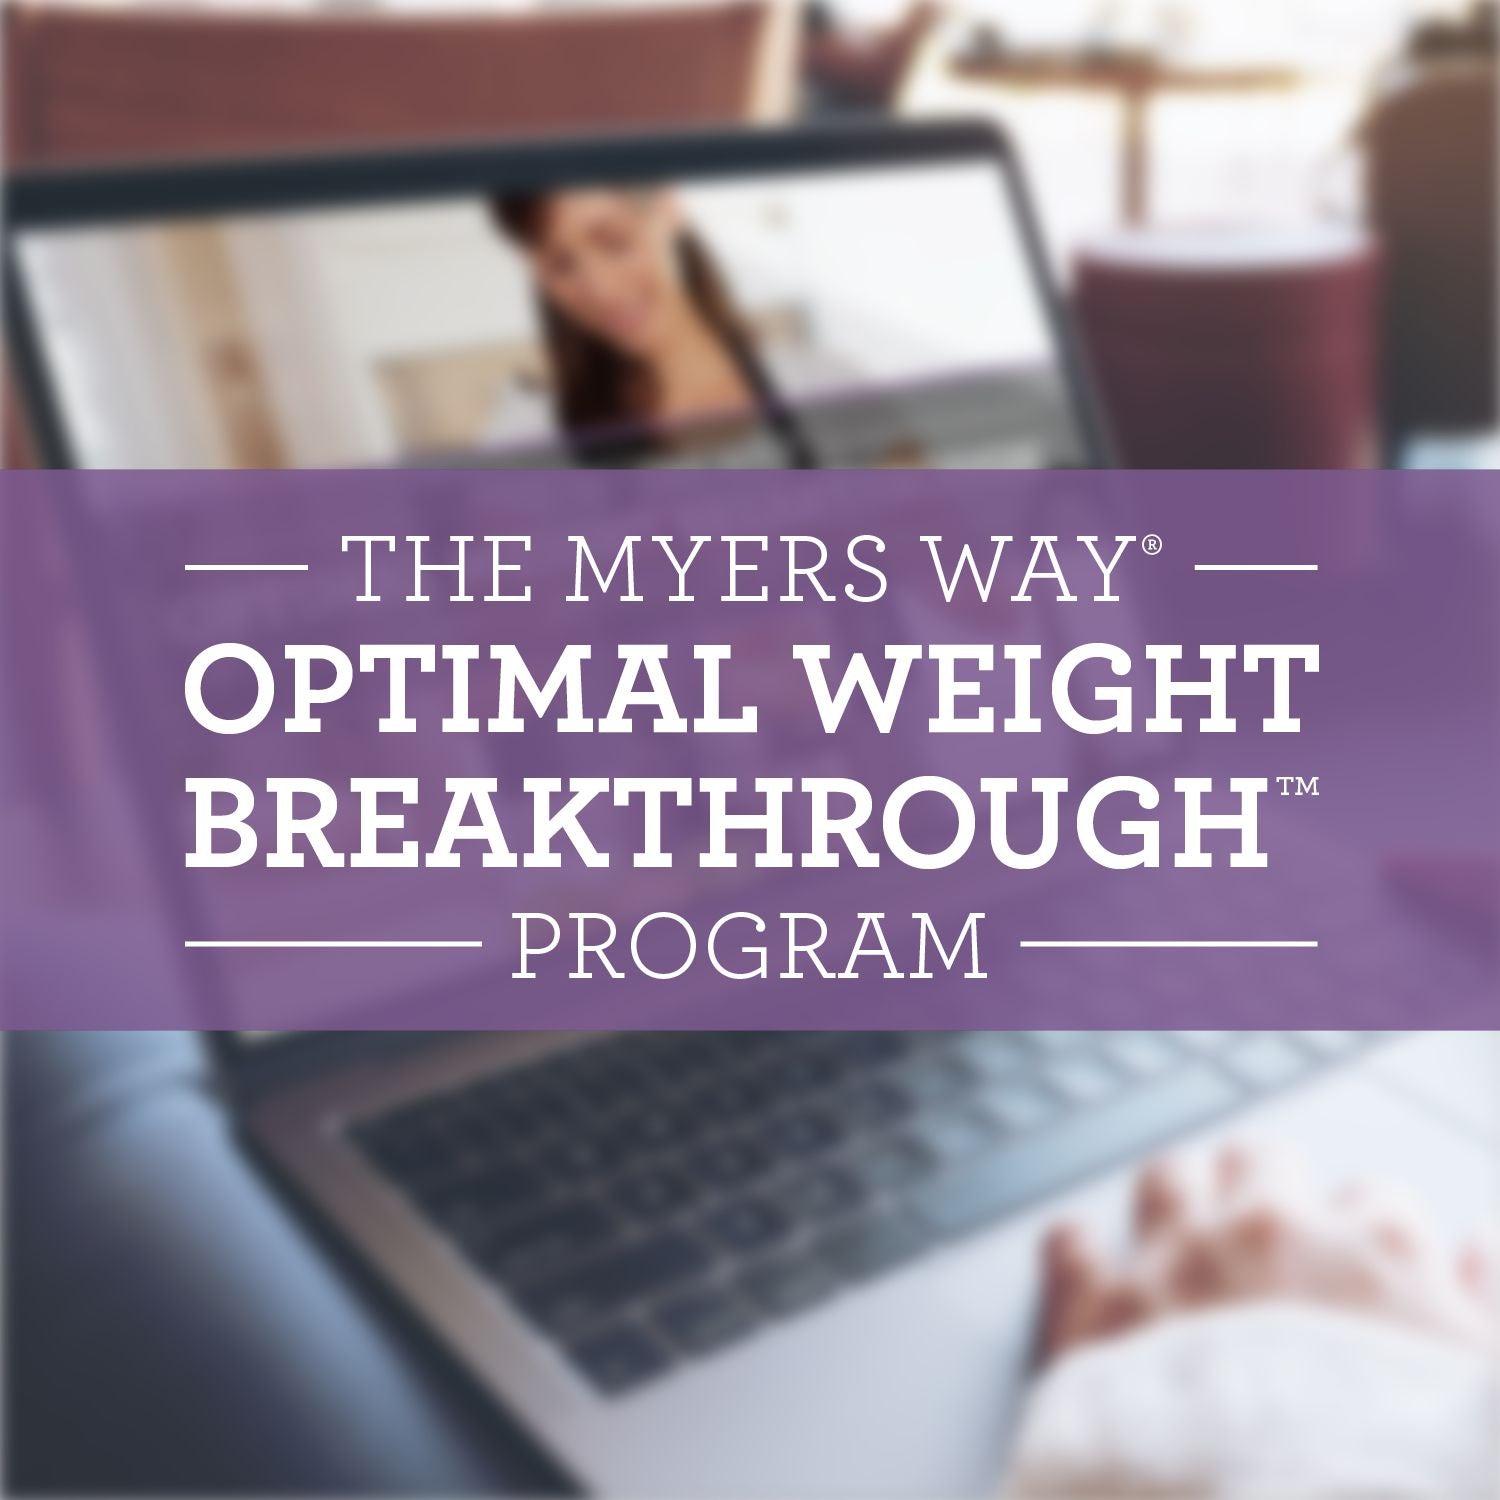 Optimal Weight Breakthrough Program - CLA, Lean, Paleo Protein, Guides - Featured Image - Amy Myers MD®